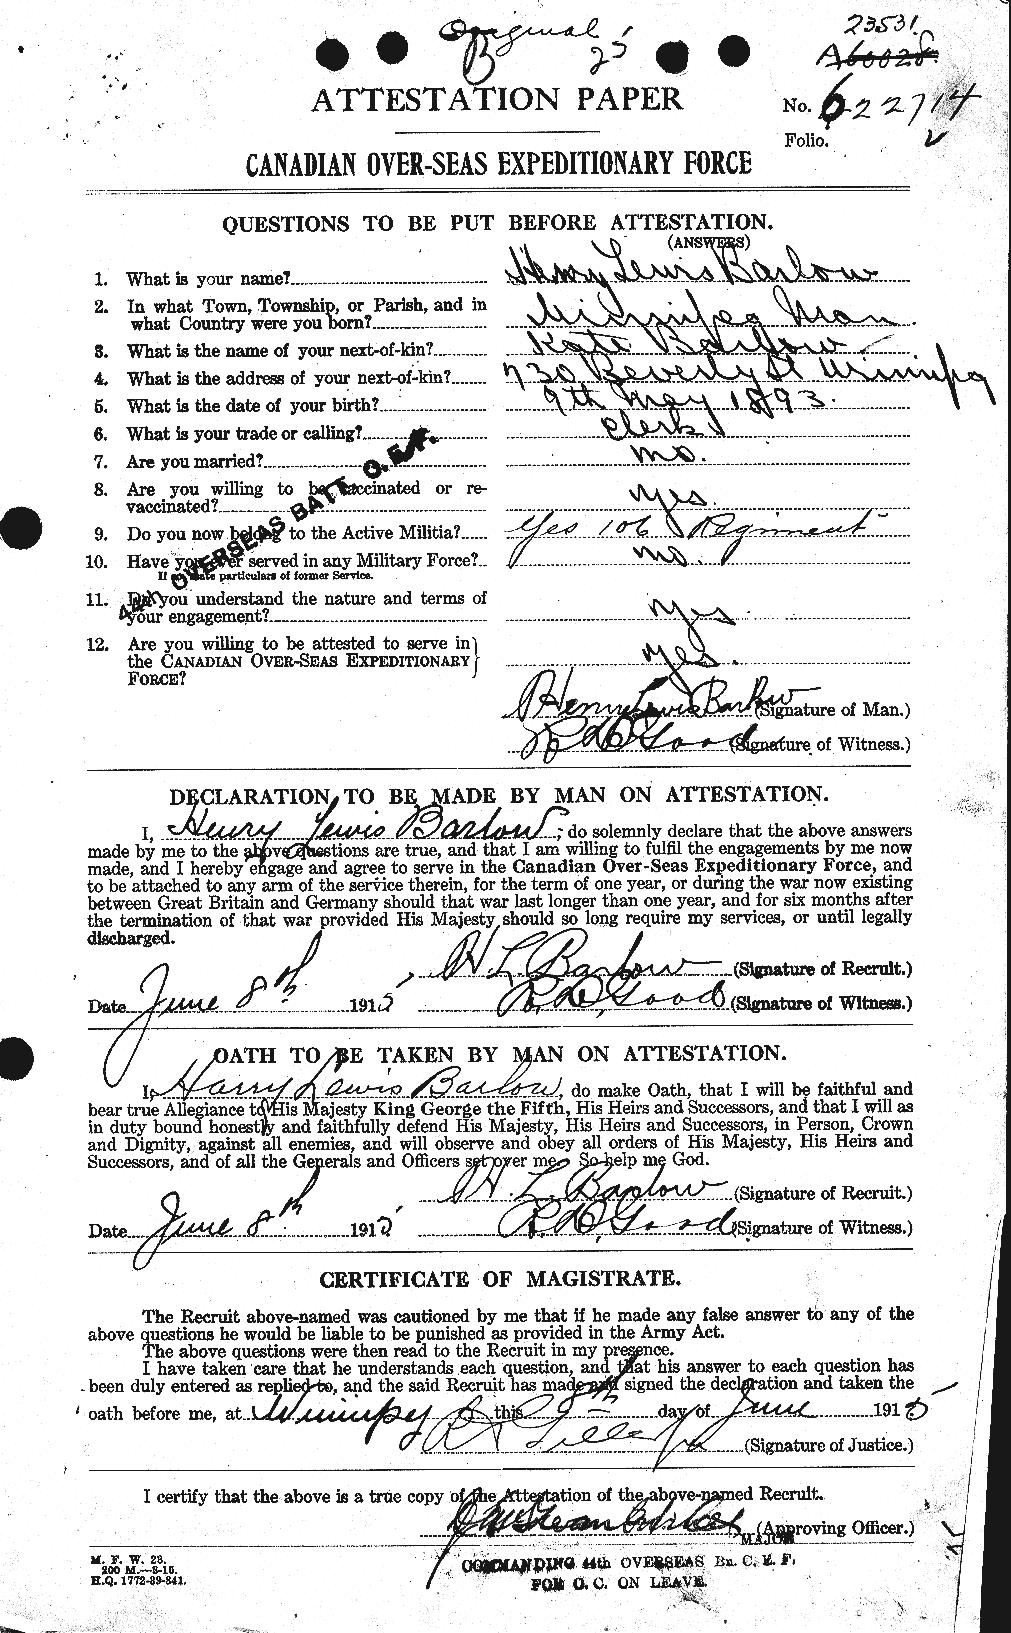 Personnel Records of the First World War - CEF 227158a